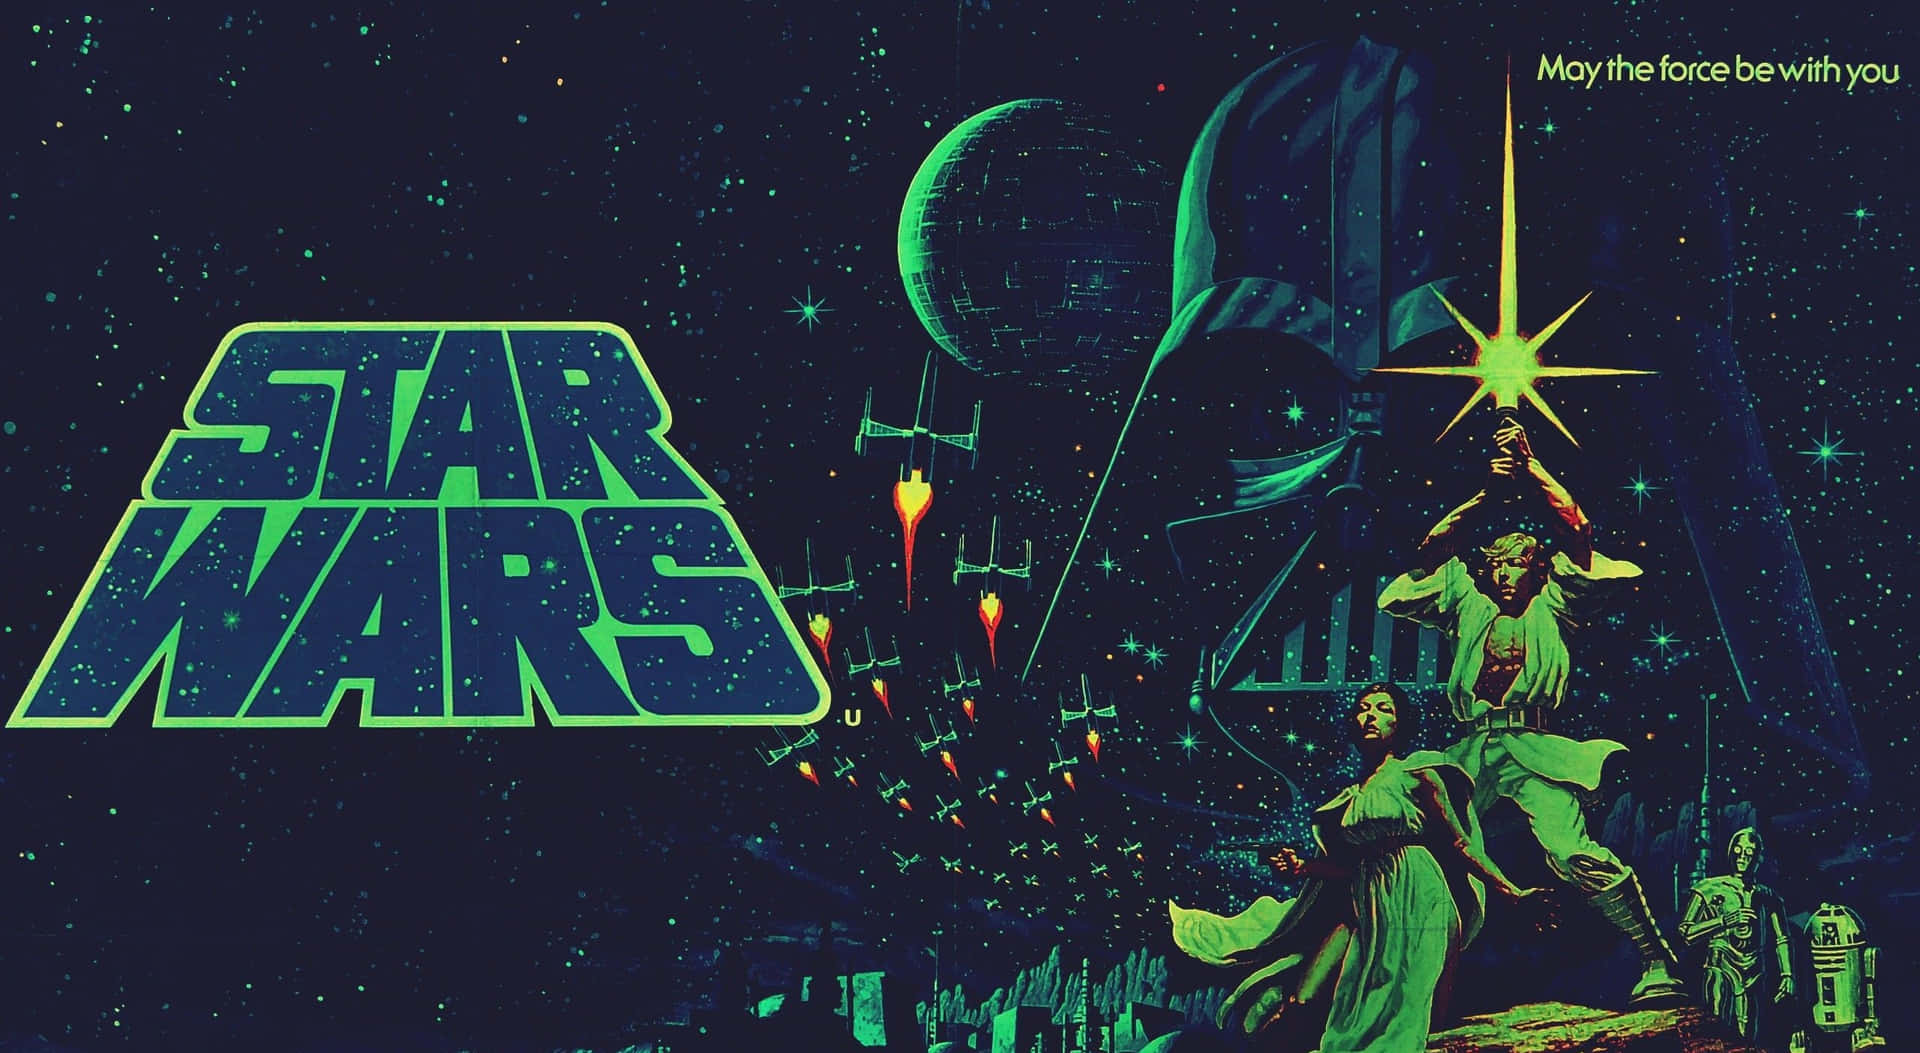 May The Force Be With You - Star Wars Wallpaper Background